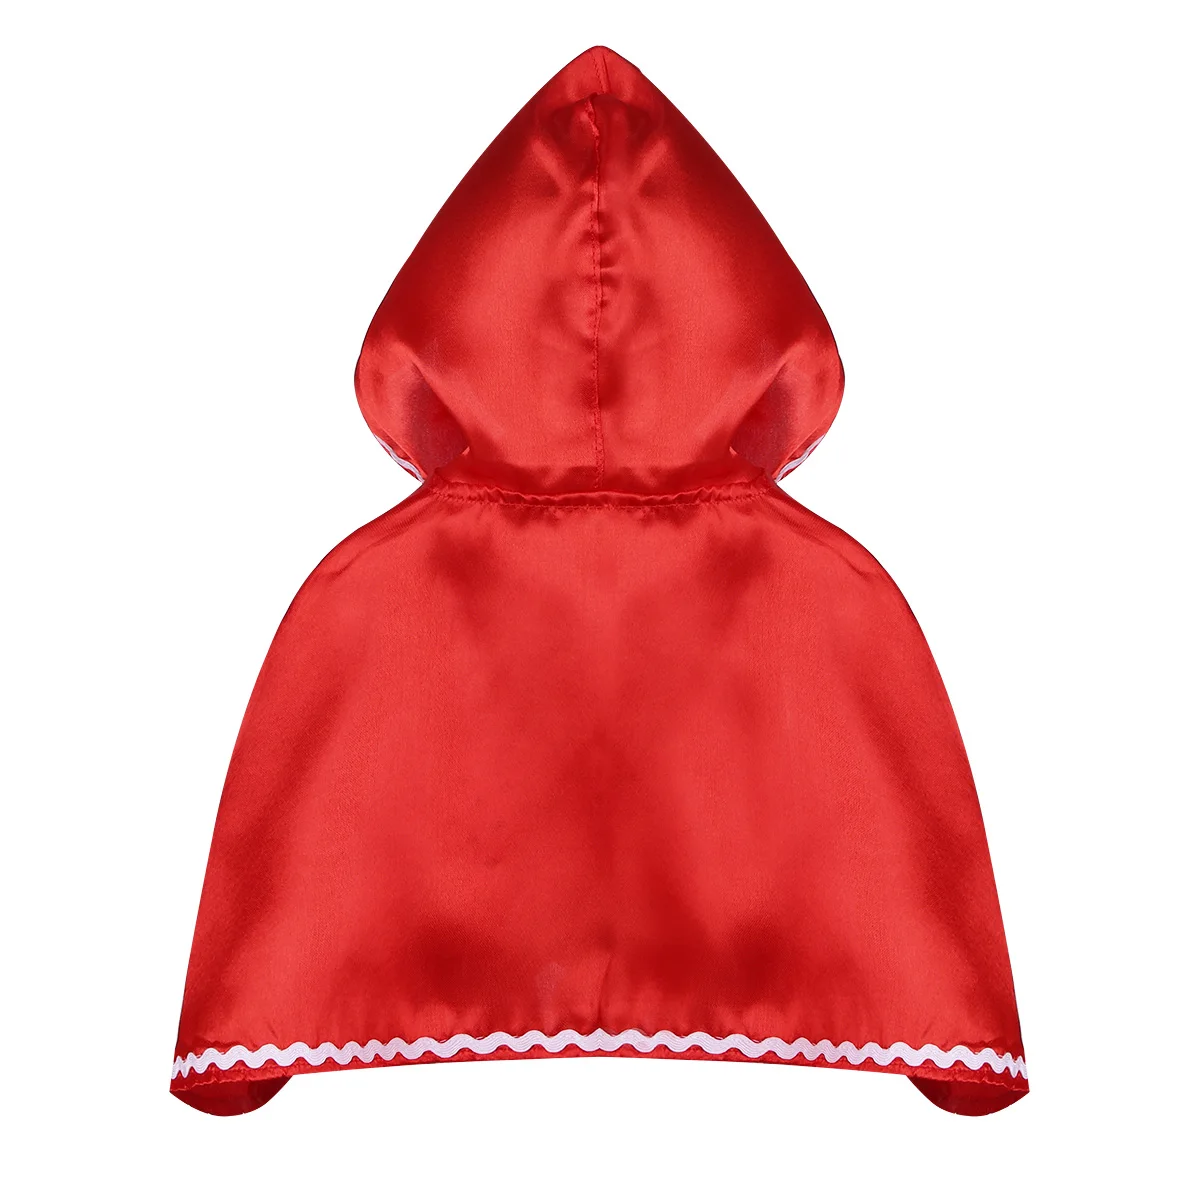 Little Red Riding Hooded Cloak Cape for Kids Girls Halloween Princess Costume Holiday Festival Party Dress Up Cape Cosplay